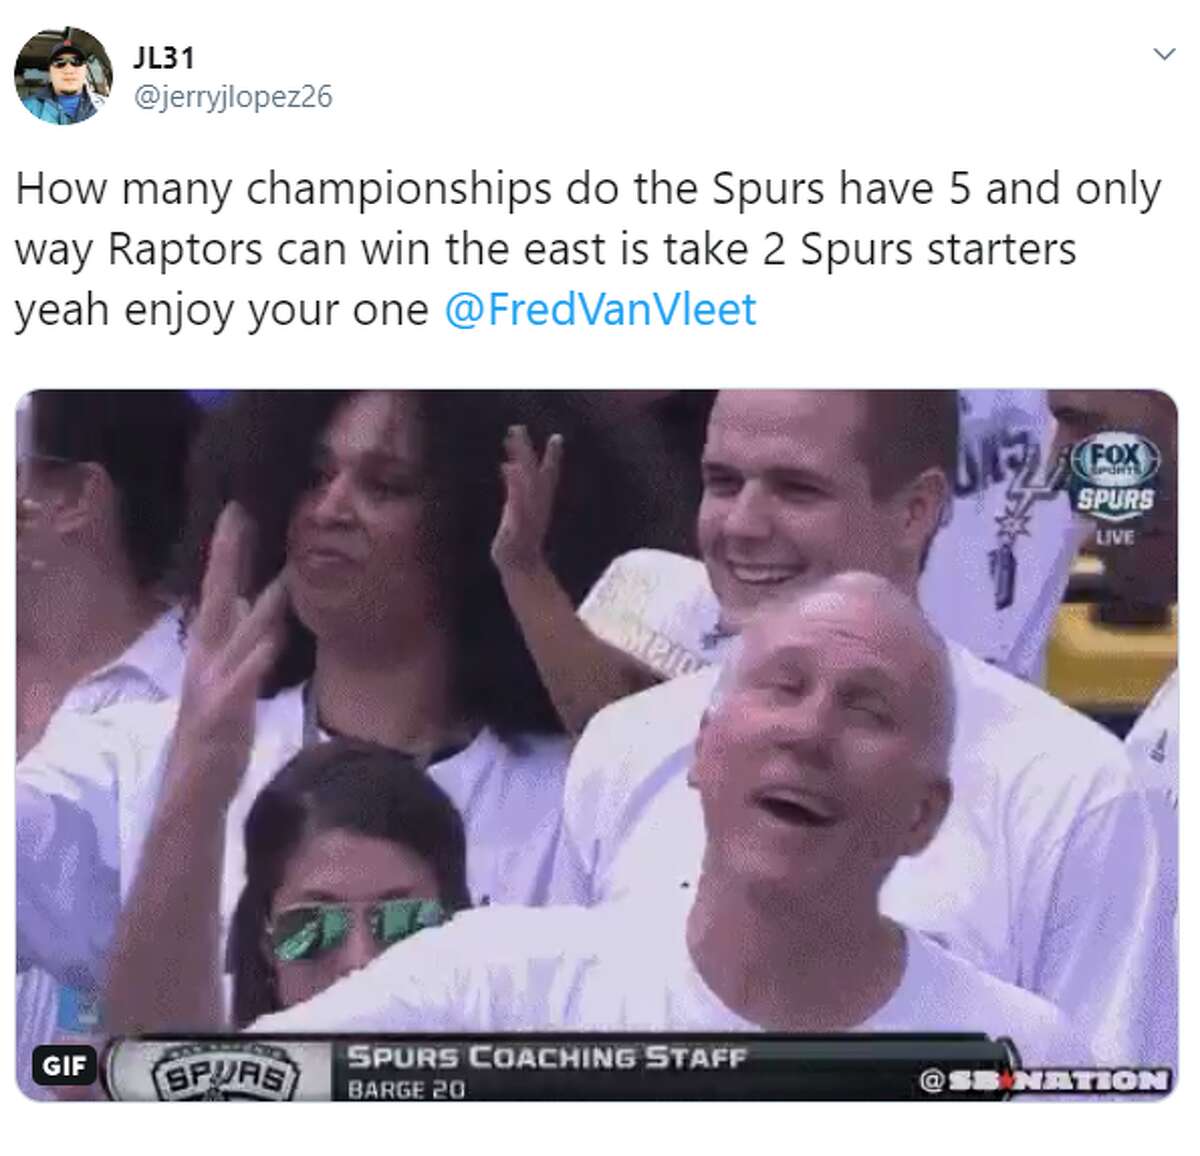 @jerrylopez26: How many championships do the Spurs have 5 and only way Raptors can win the east is take 2 Spurs starters yeah enjoy your one @FredVanVleet